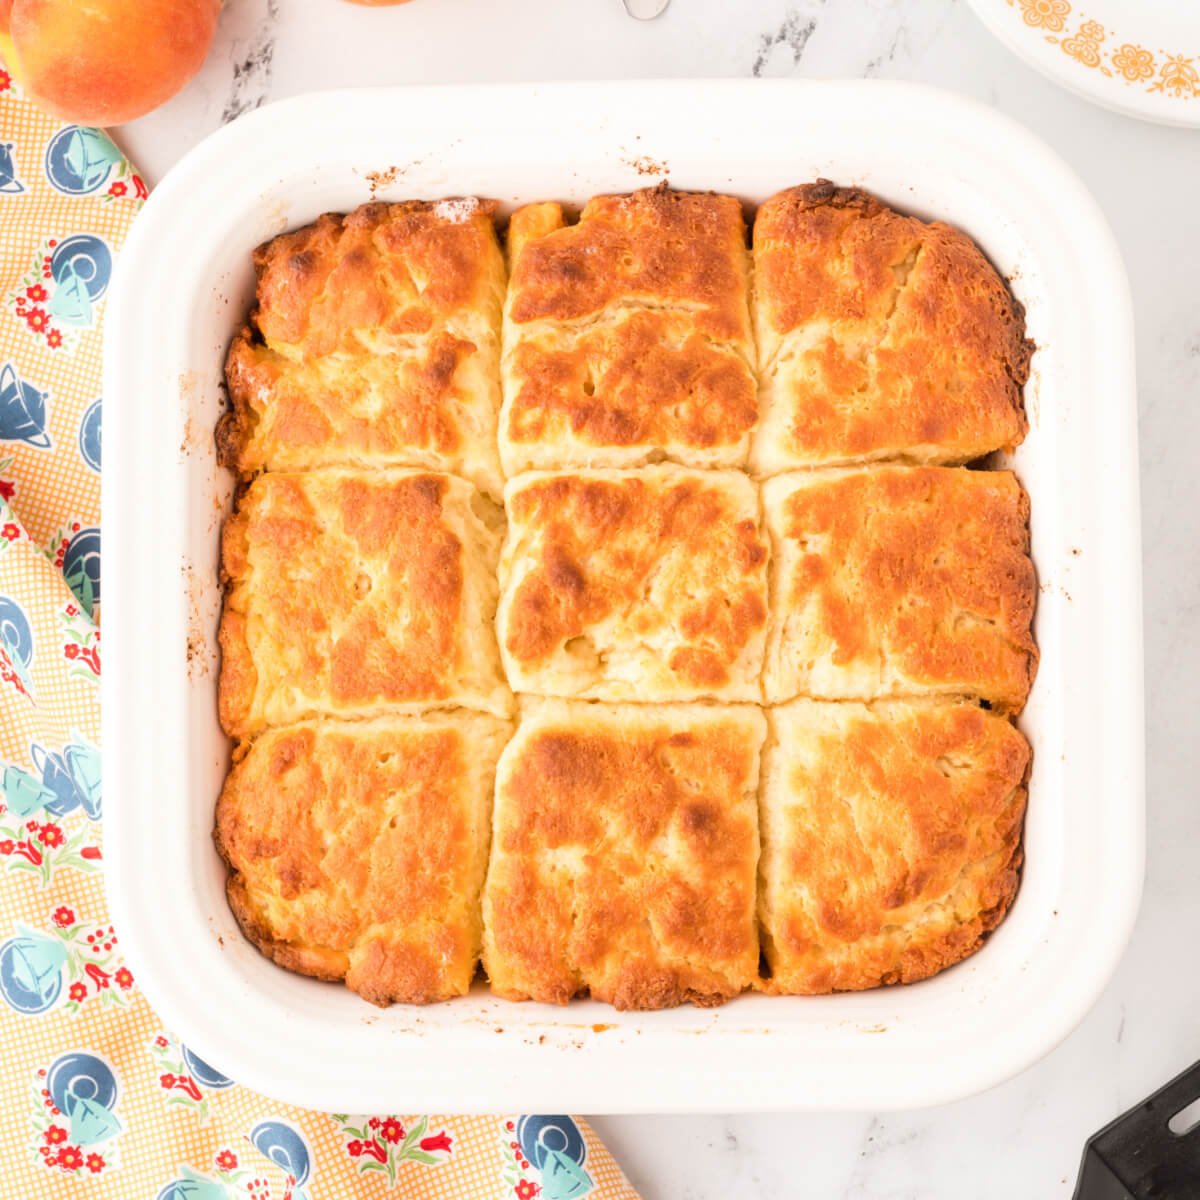 https://www.lovebakesgoodcakes.com/wp-content/uploads/2018/06/Butter-Dip-Biscuits-square.jpg